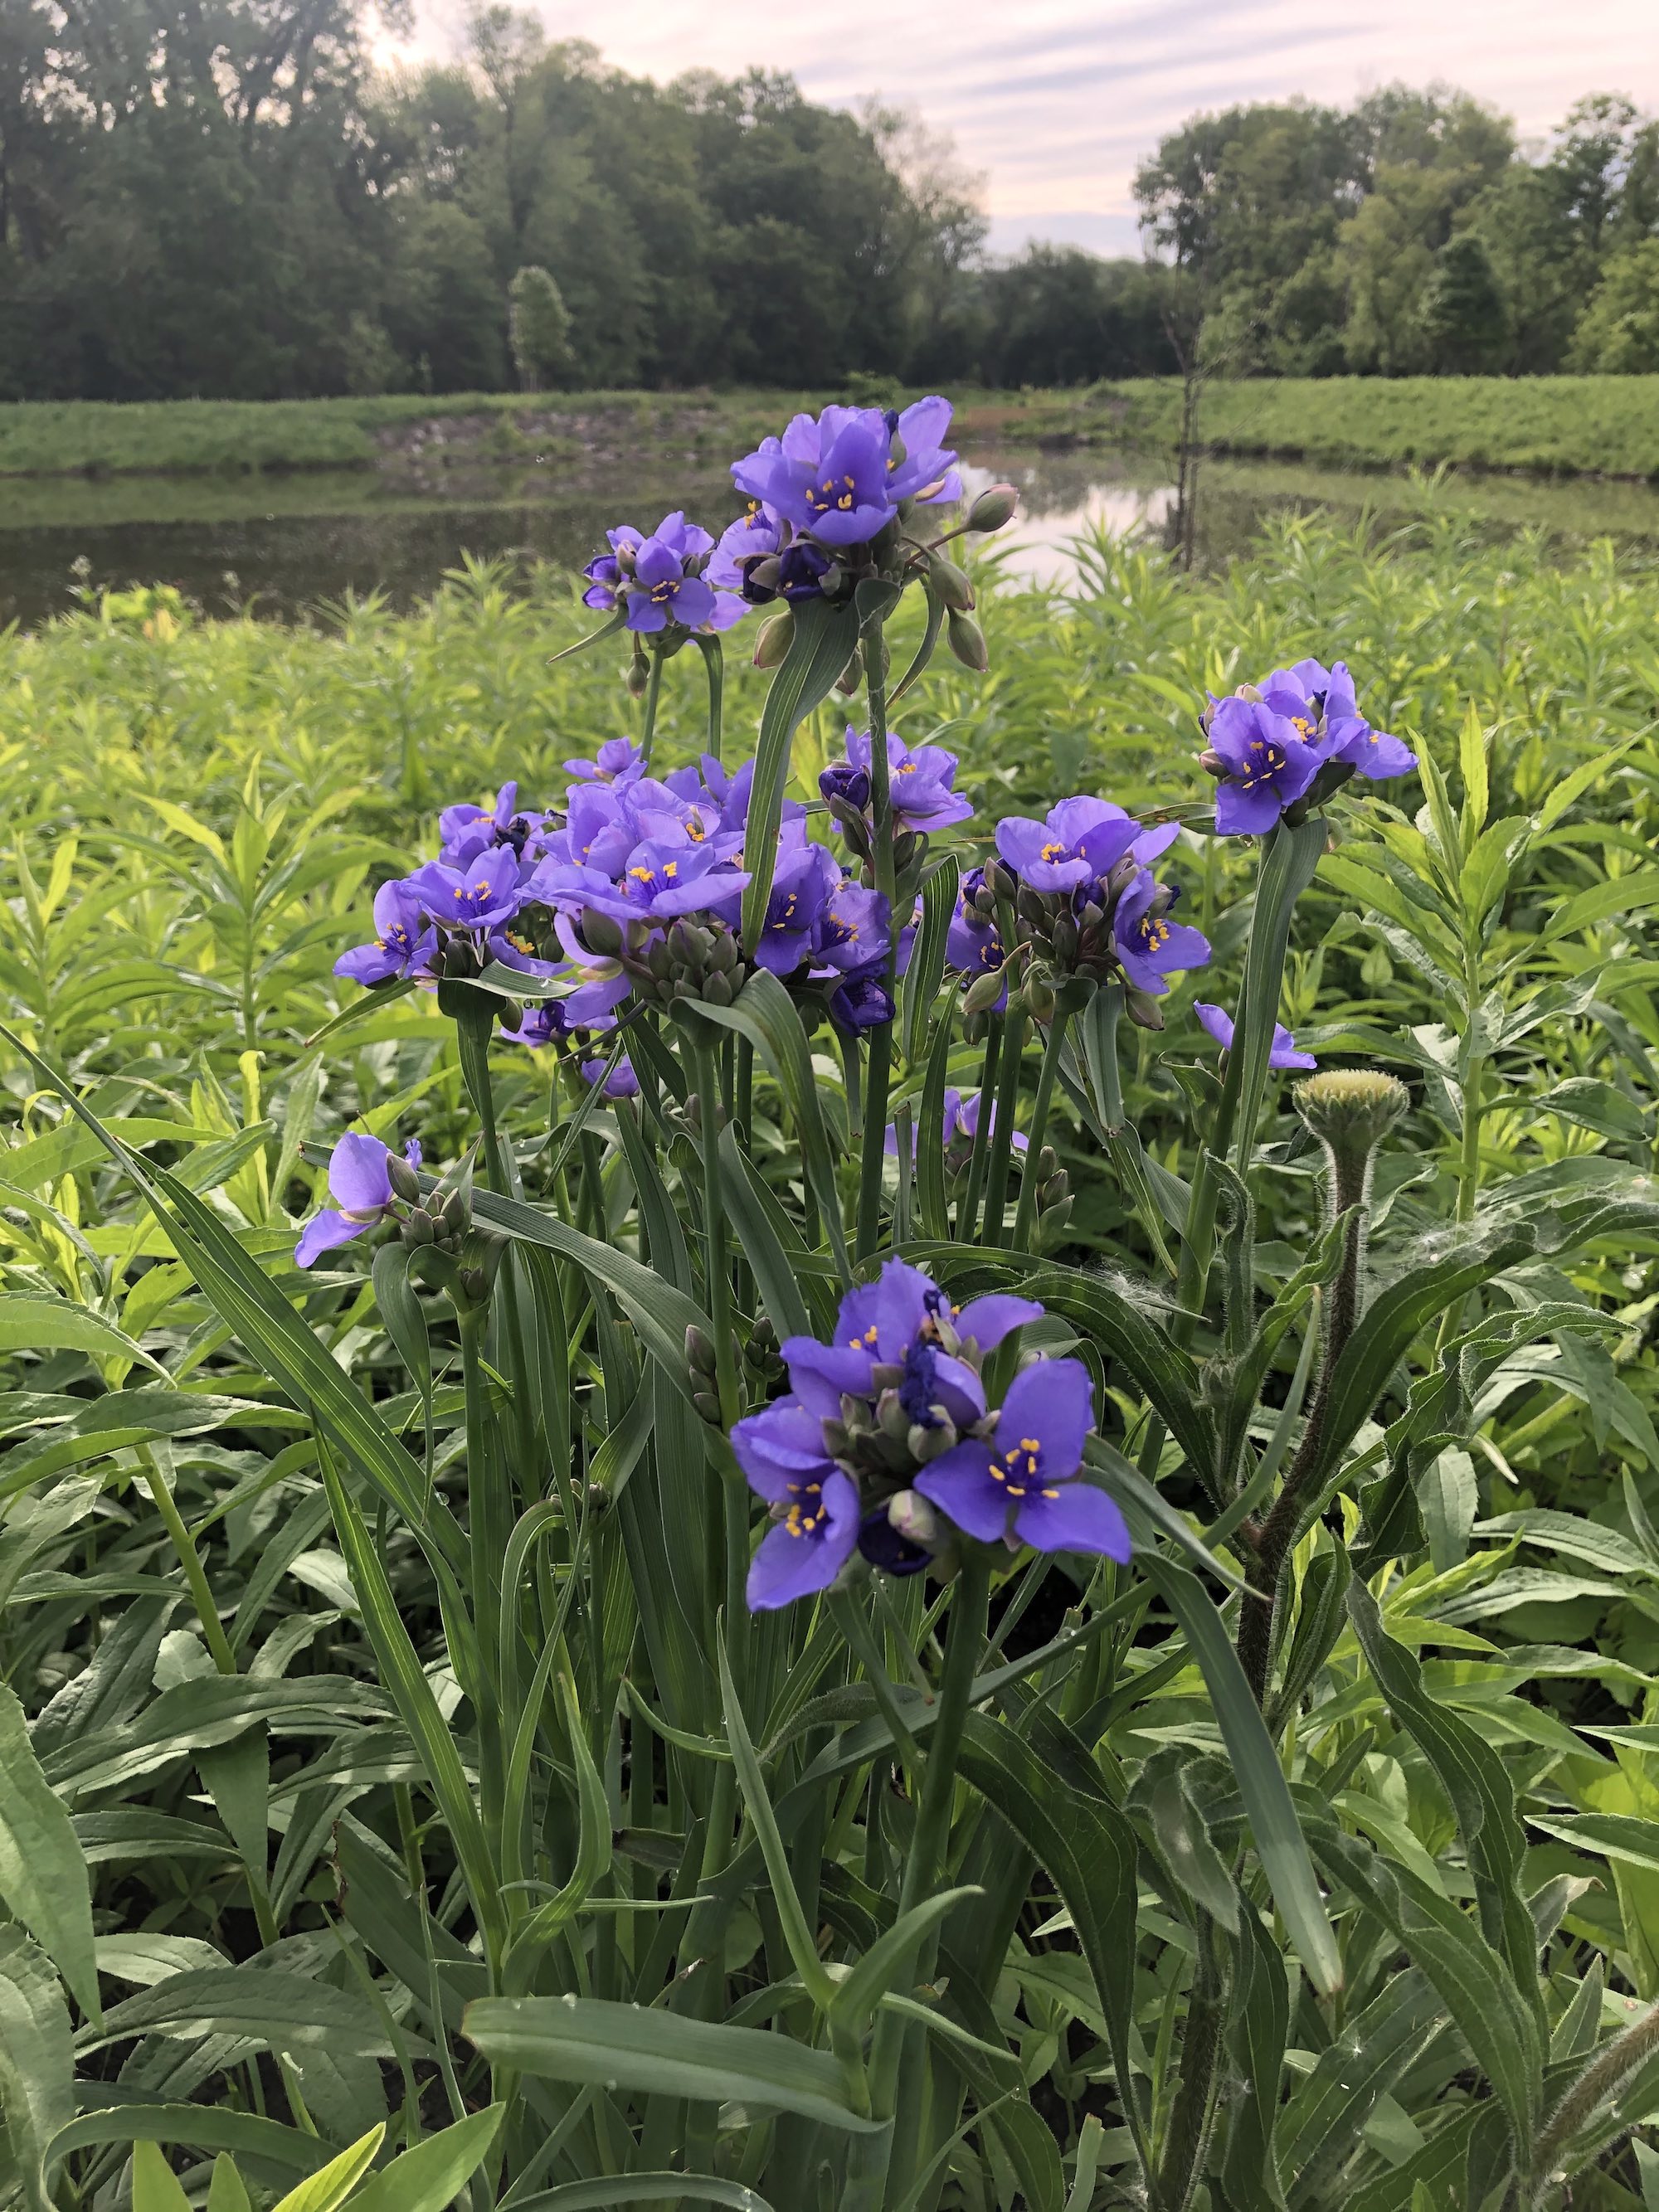 Spiderwort on bank of retaining pond in Madison, Wisconsin on May 31, 2021.